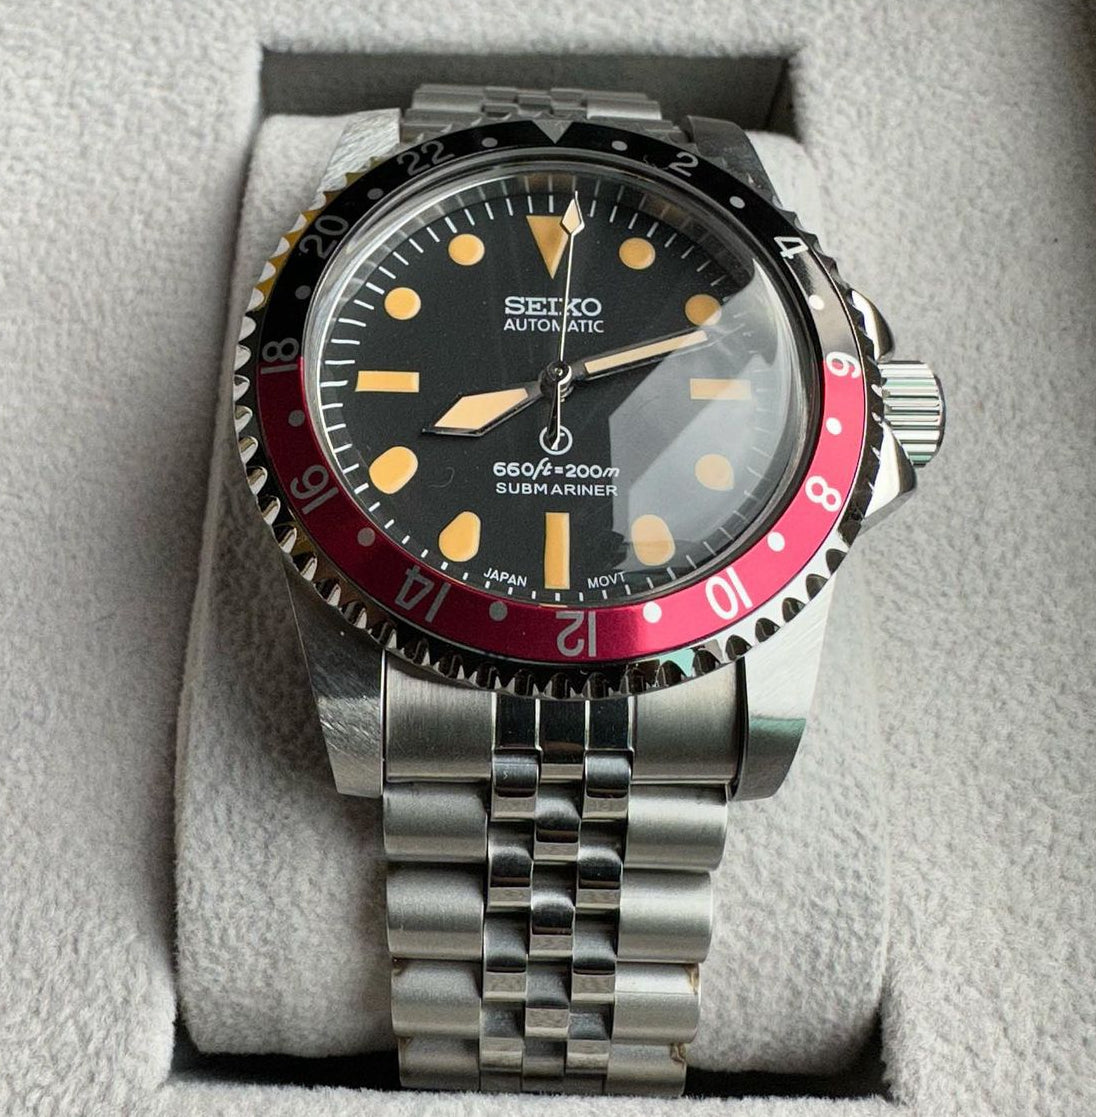 Vintage Seiko coke submariner automatic watch 40mm